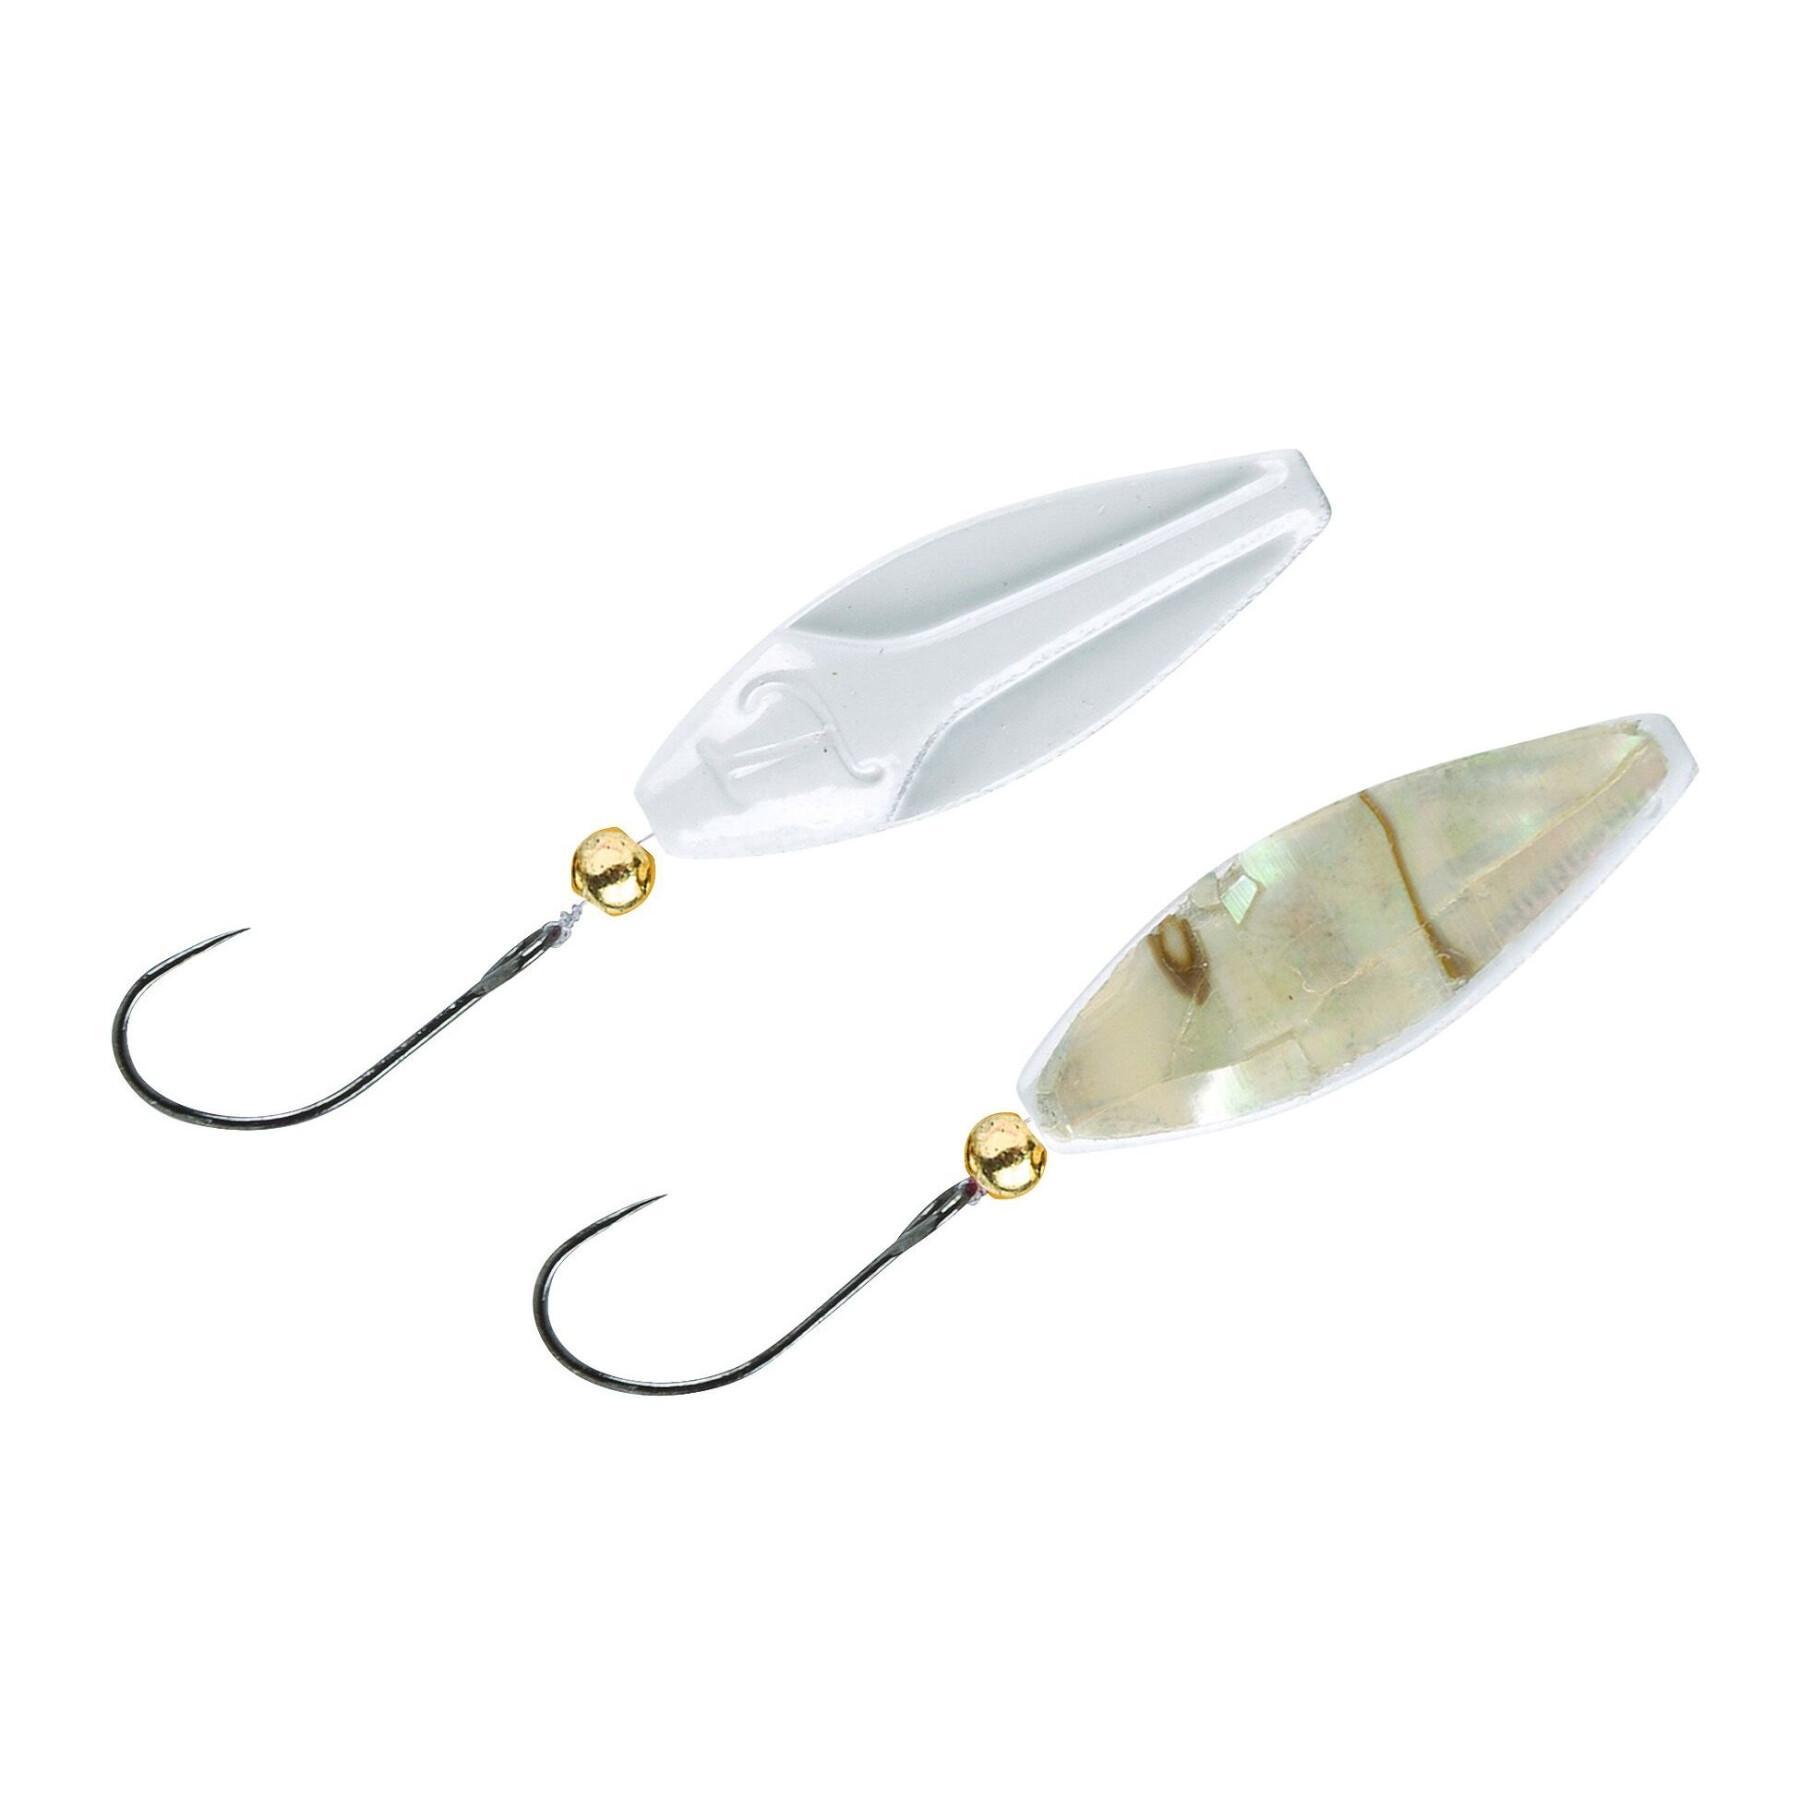 Leurre Spro Trout Master Incy Inline Spoon